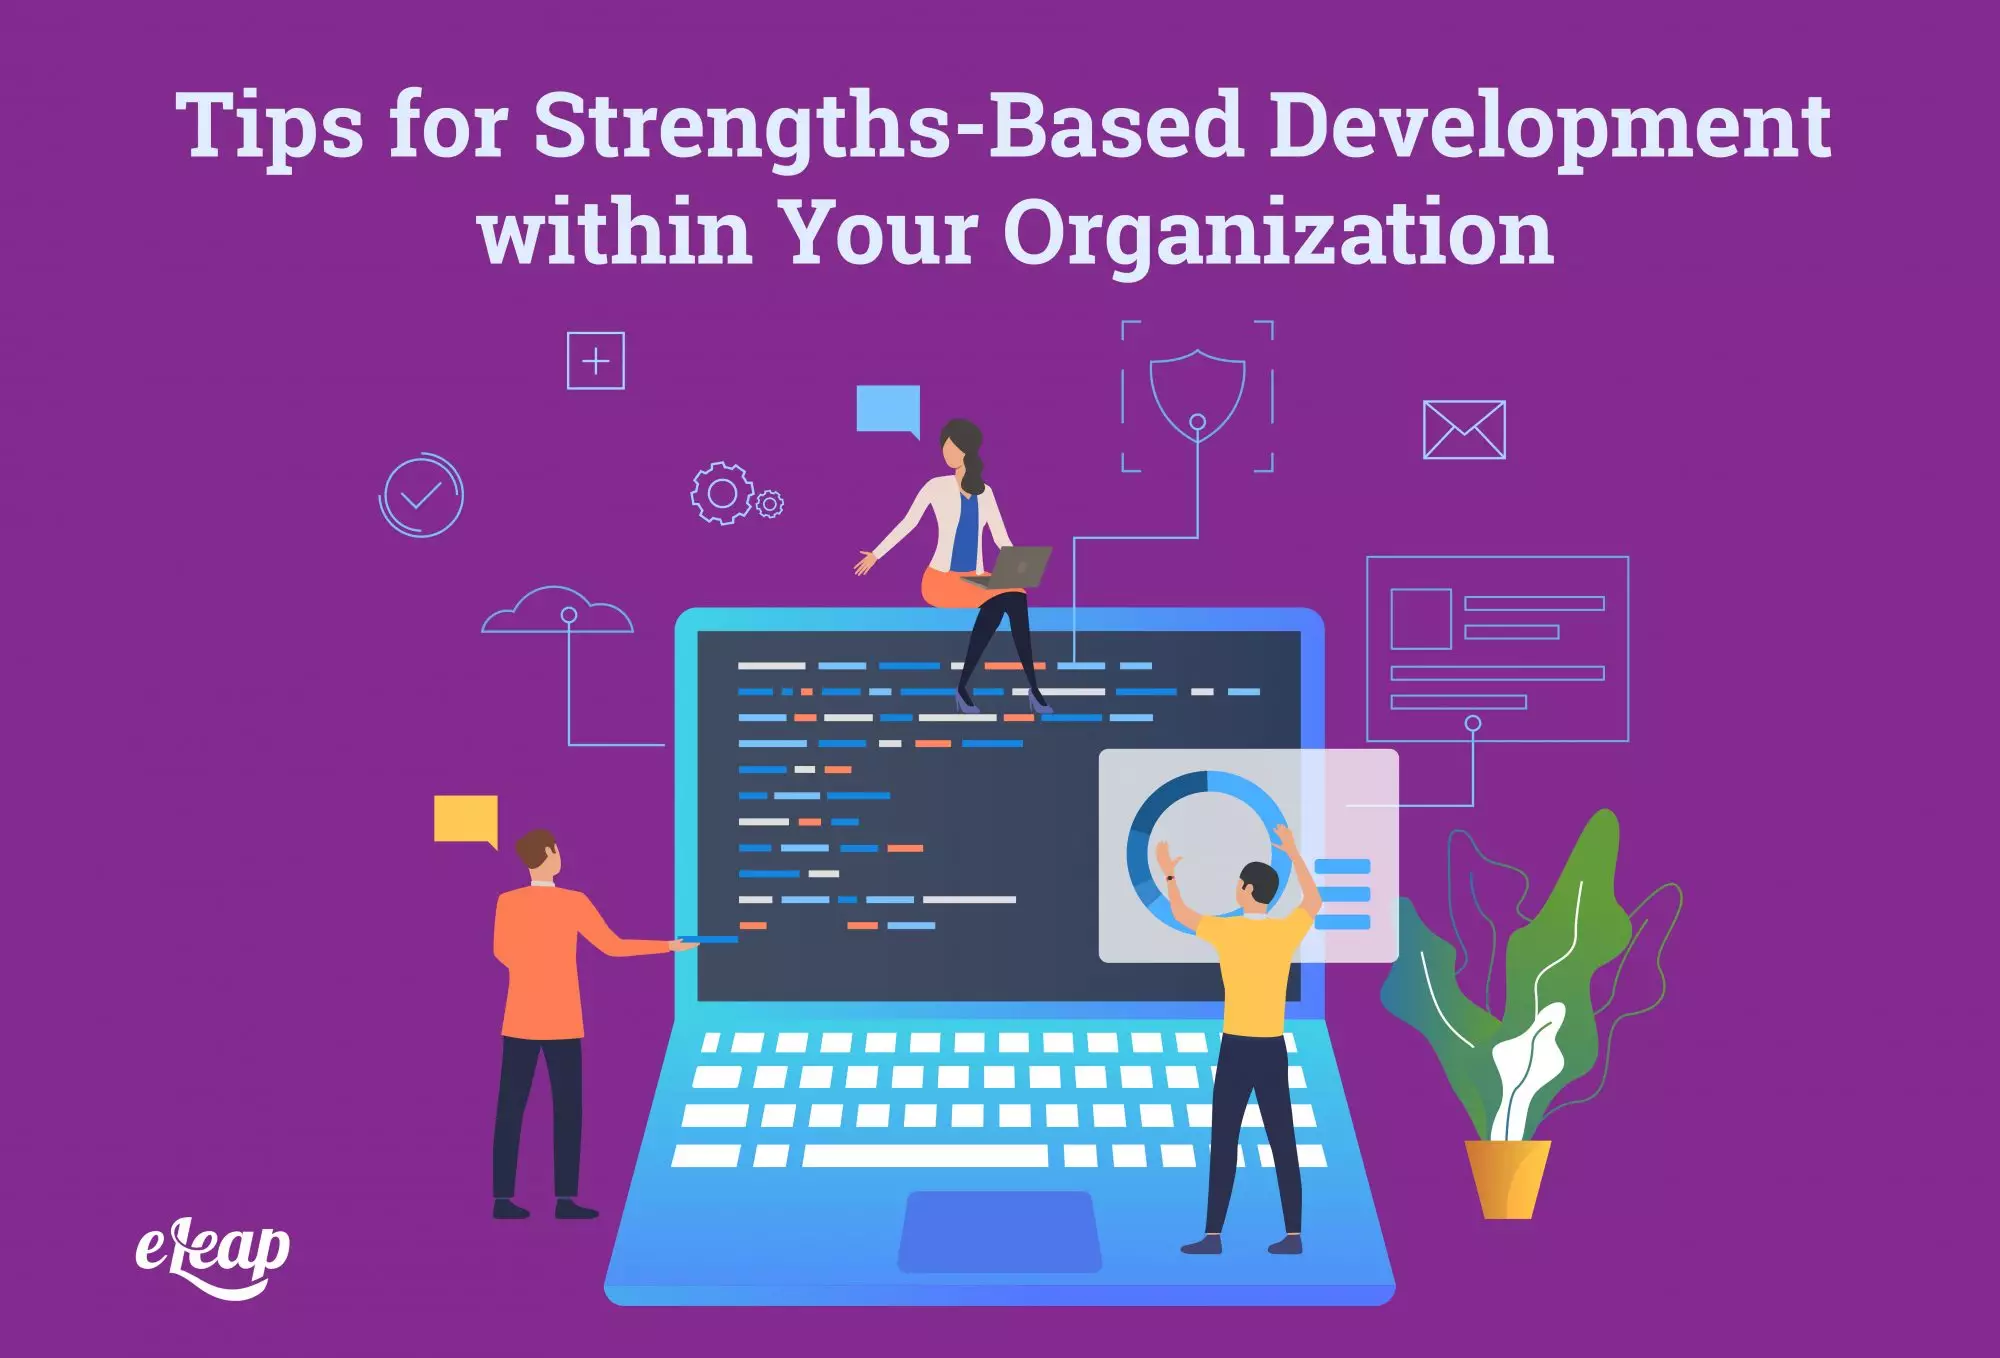 Tips for Strengths-Based Development within Your Organization